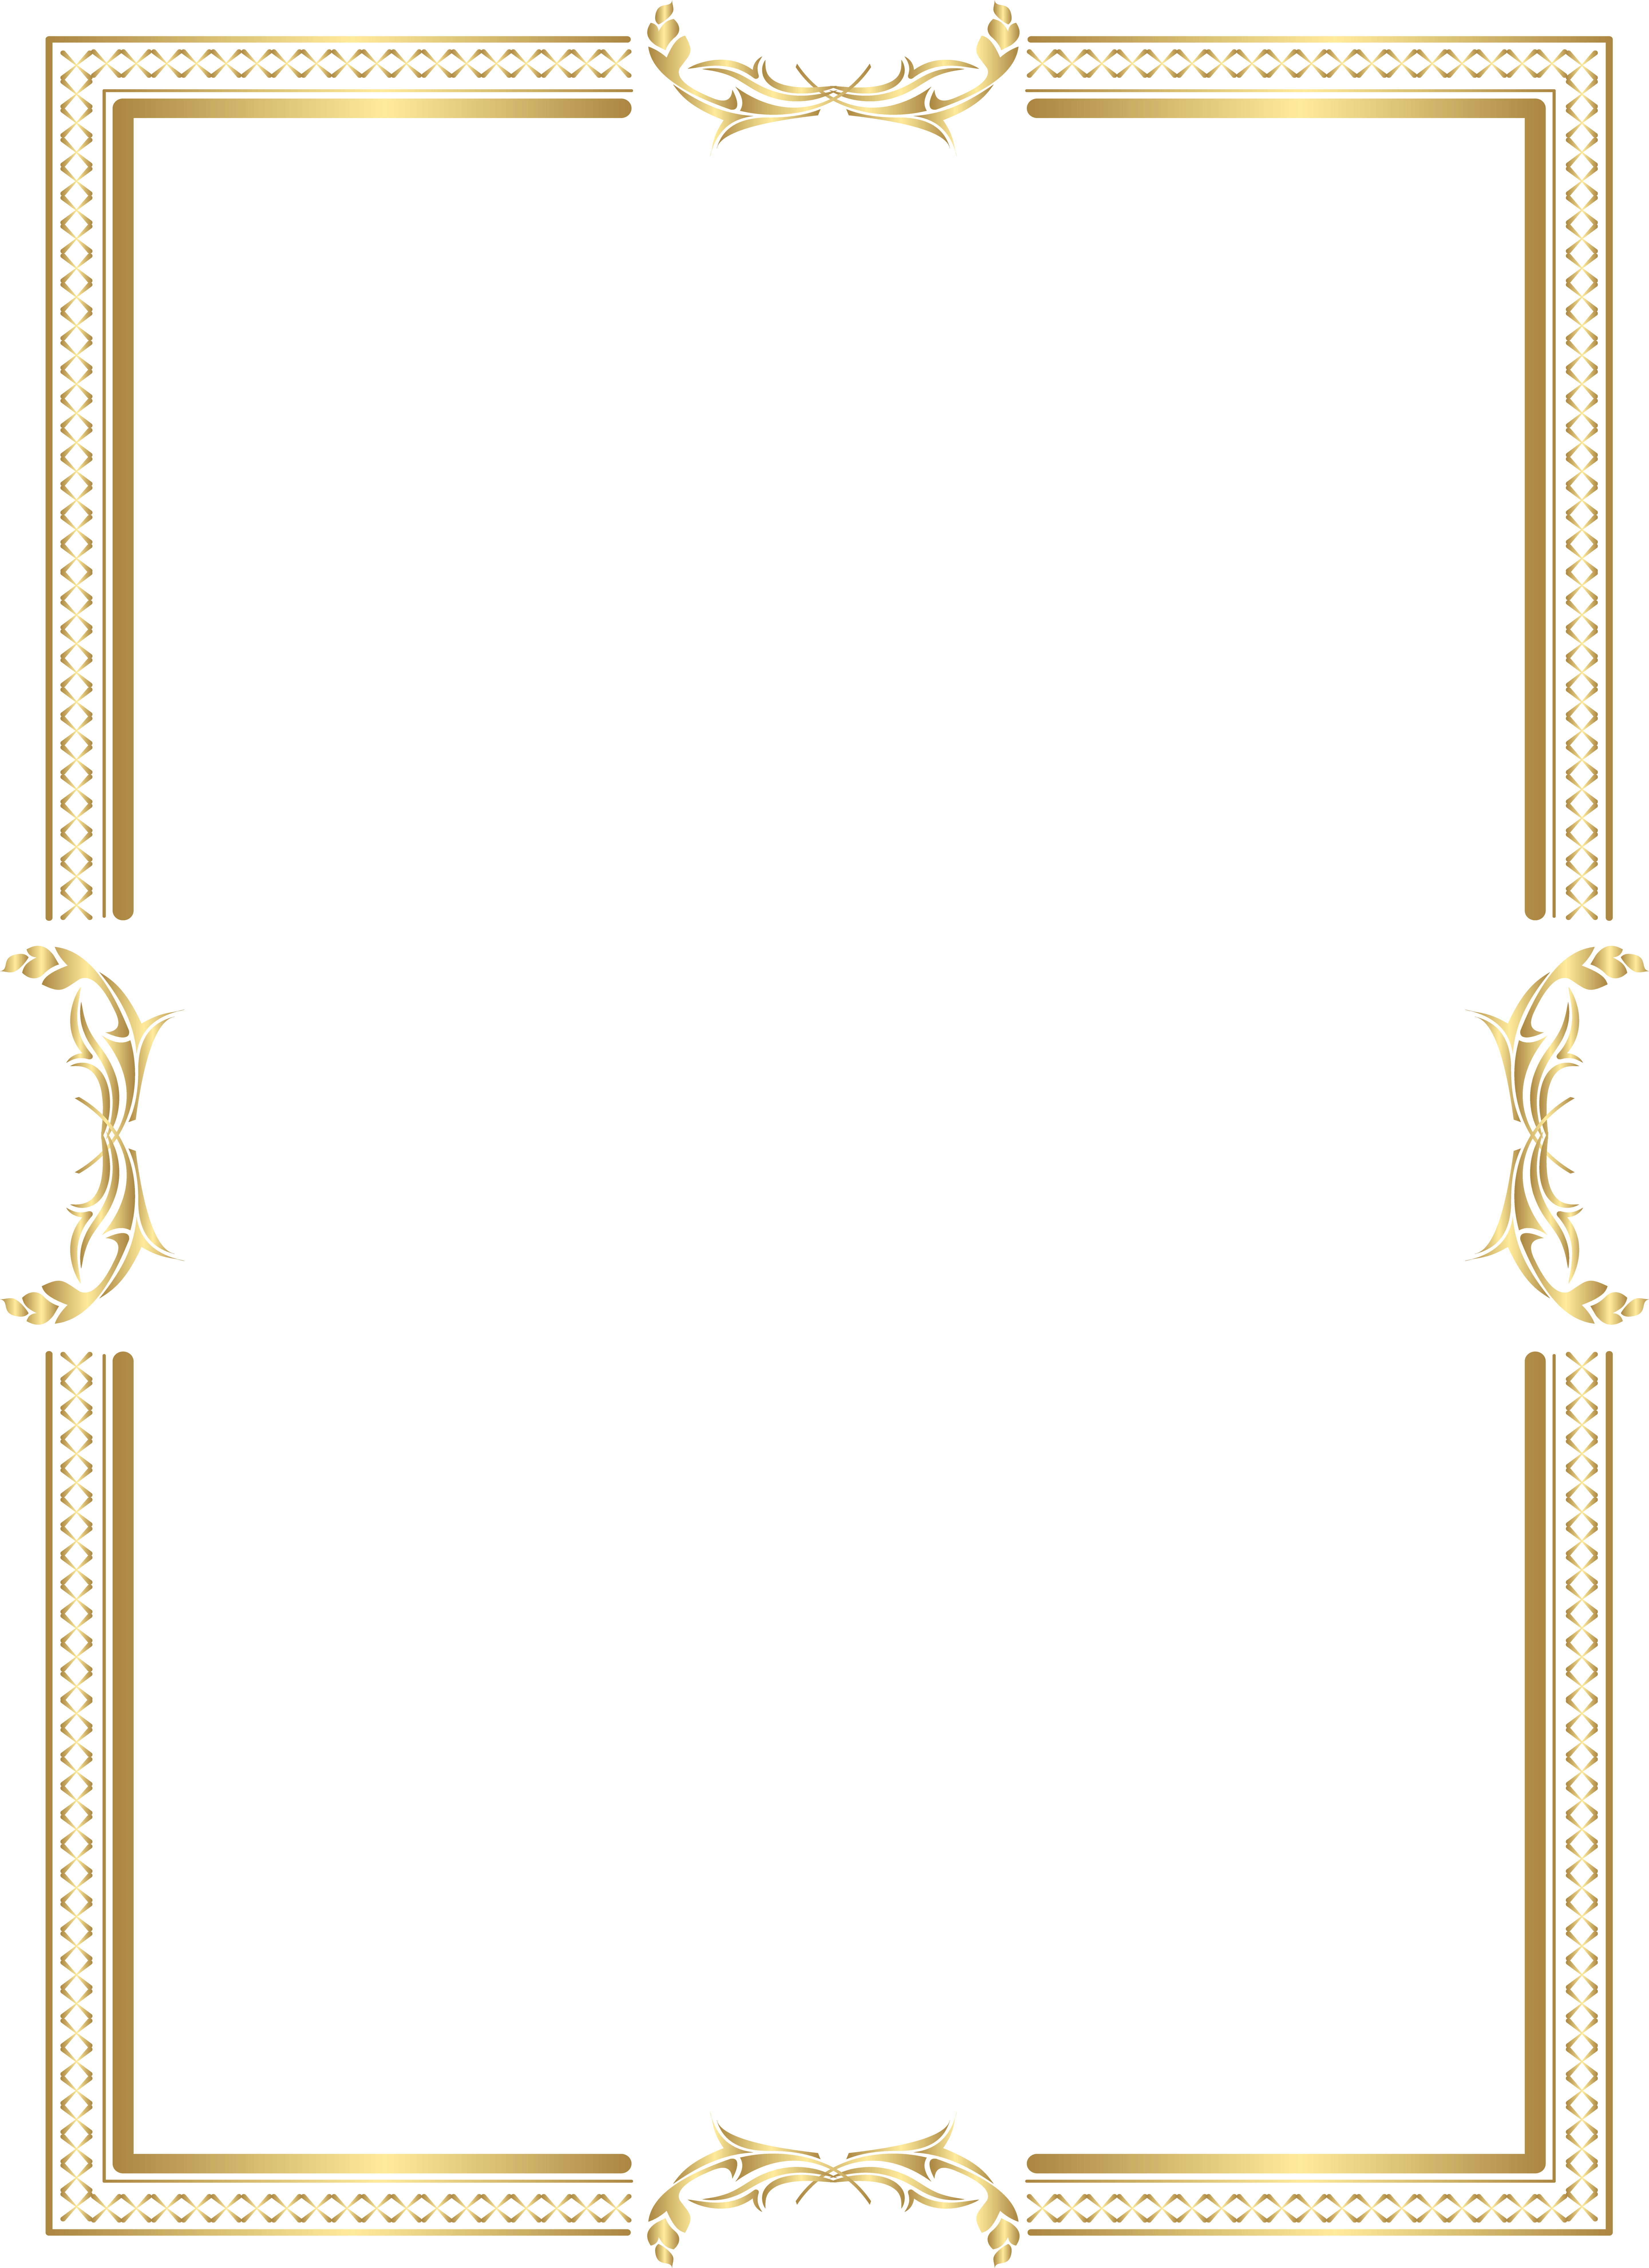 Download Transparent Gold Border PNG Image with No Background 